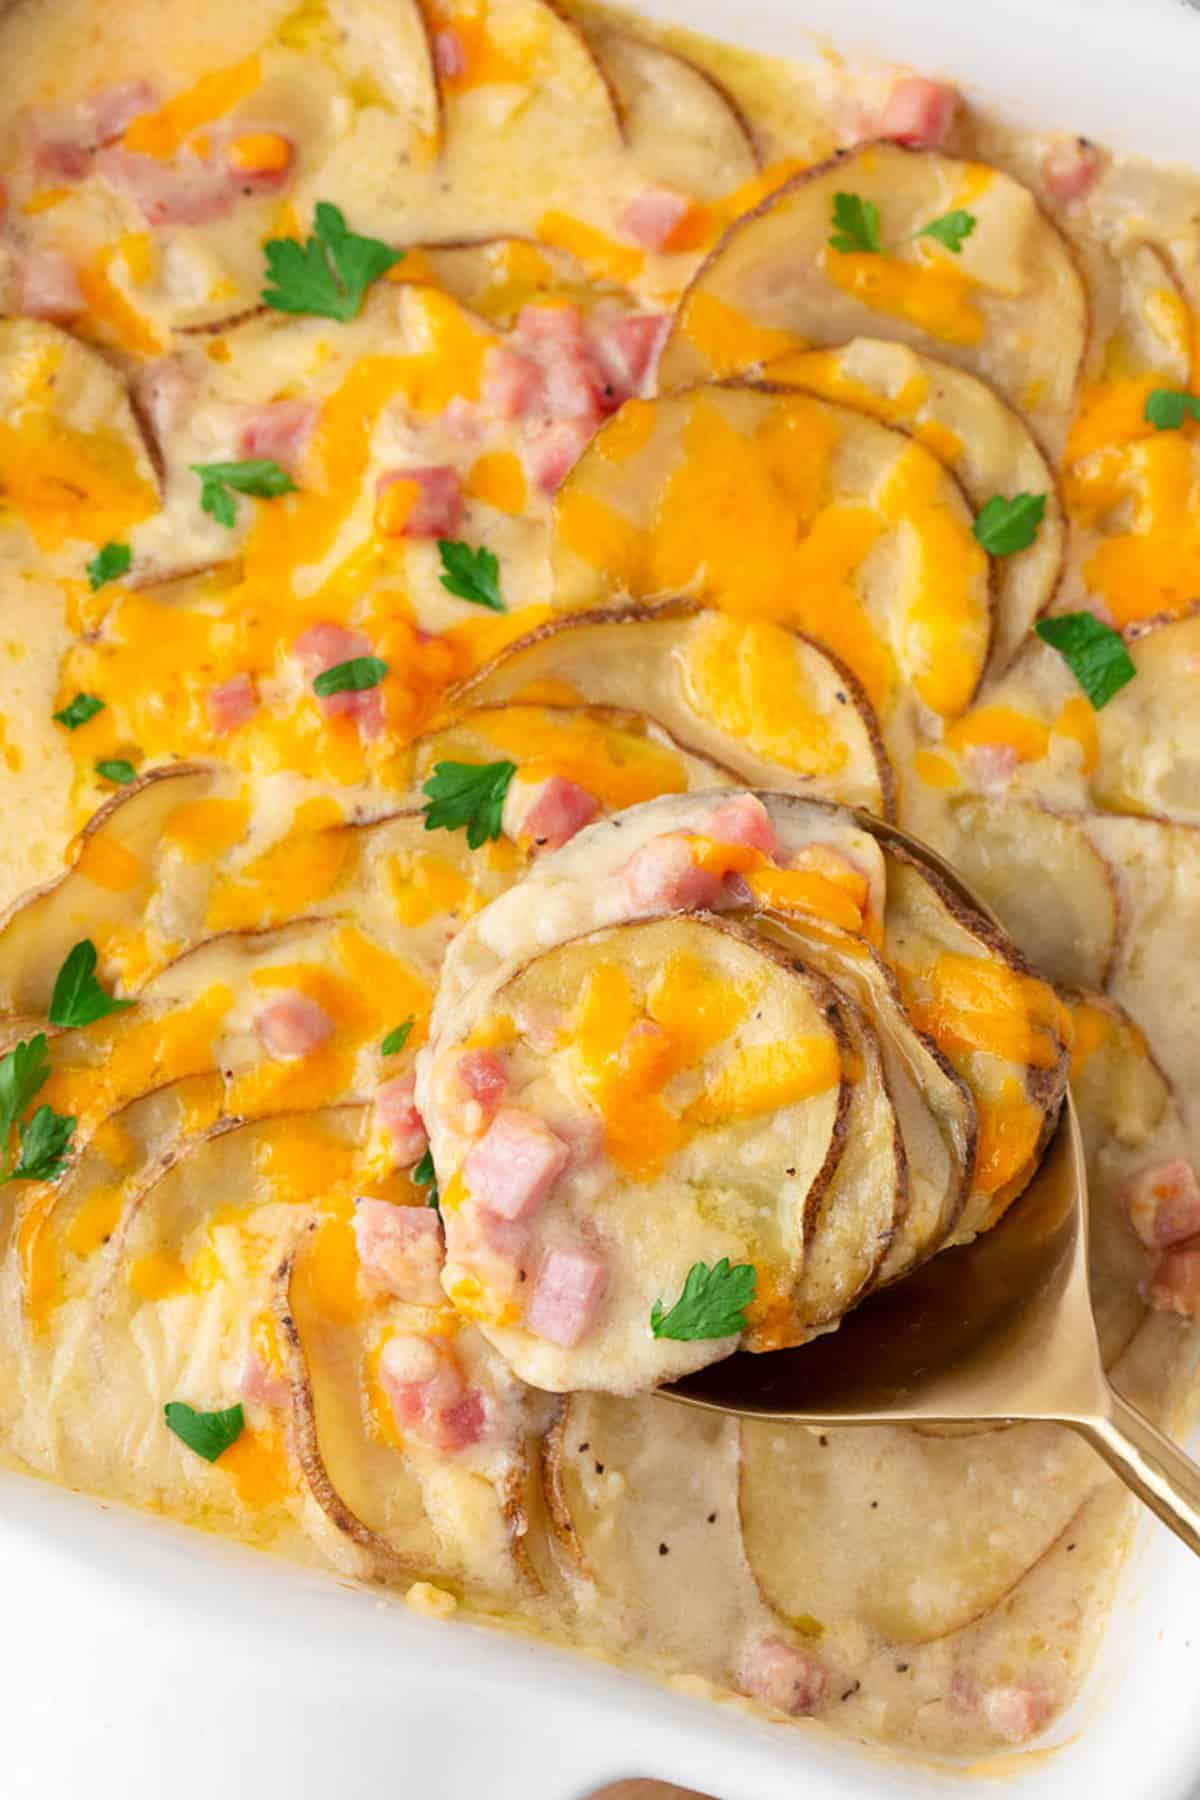 Scalloped potatoes and ham in a baking dish.